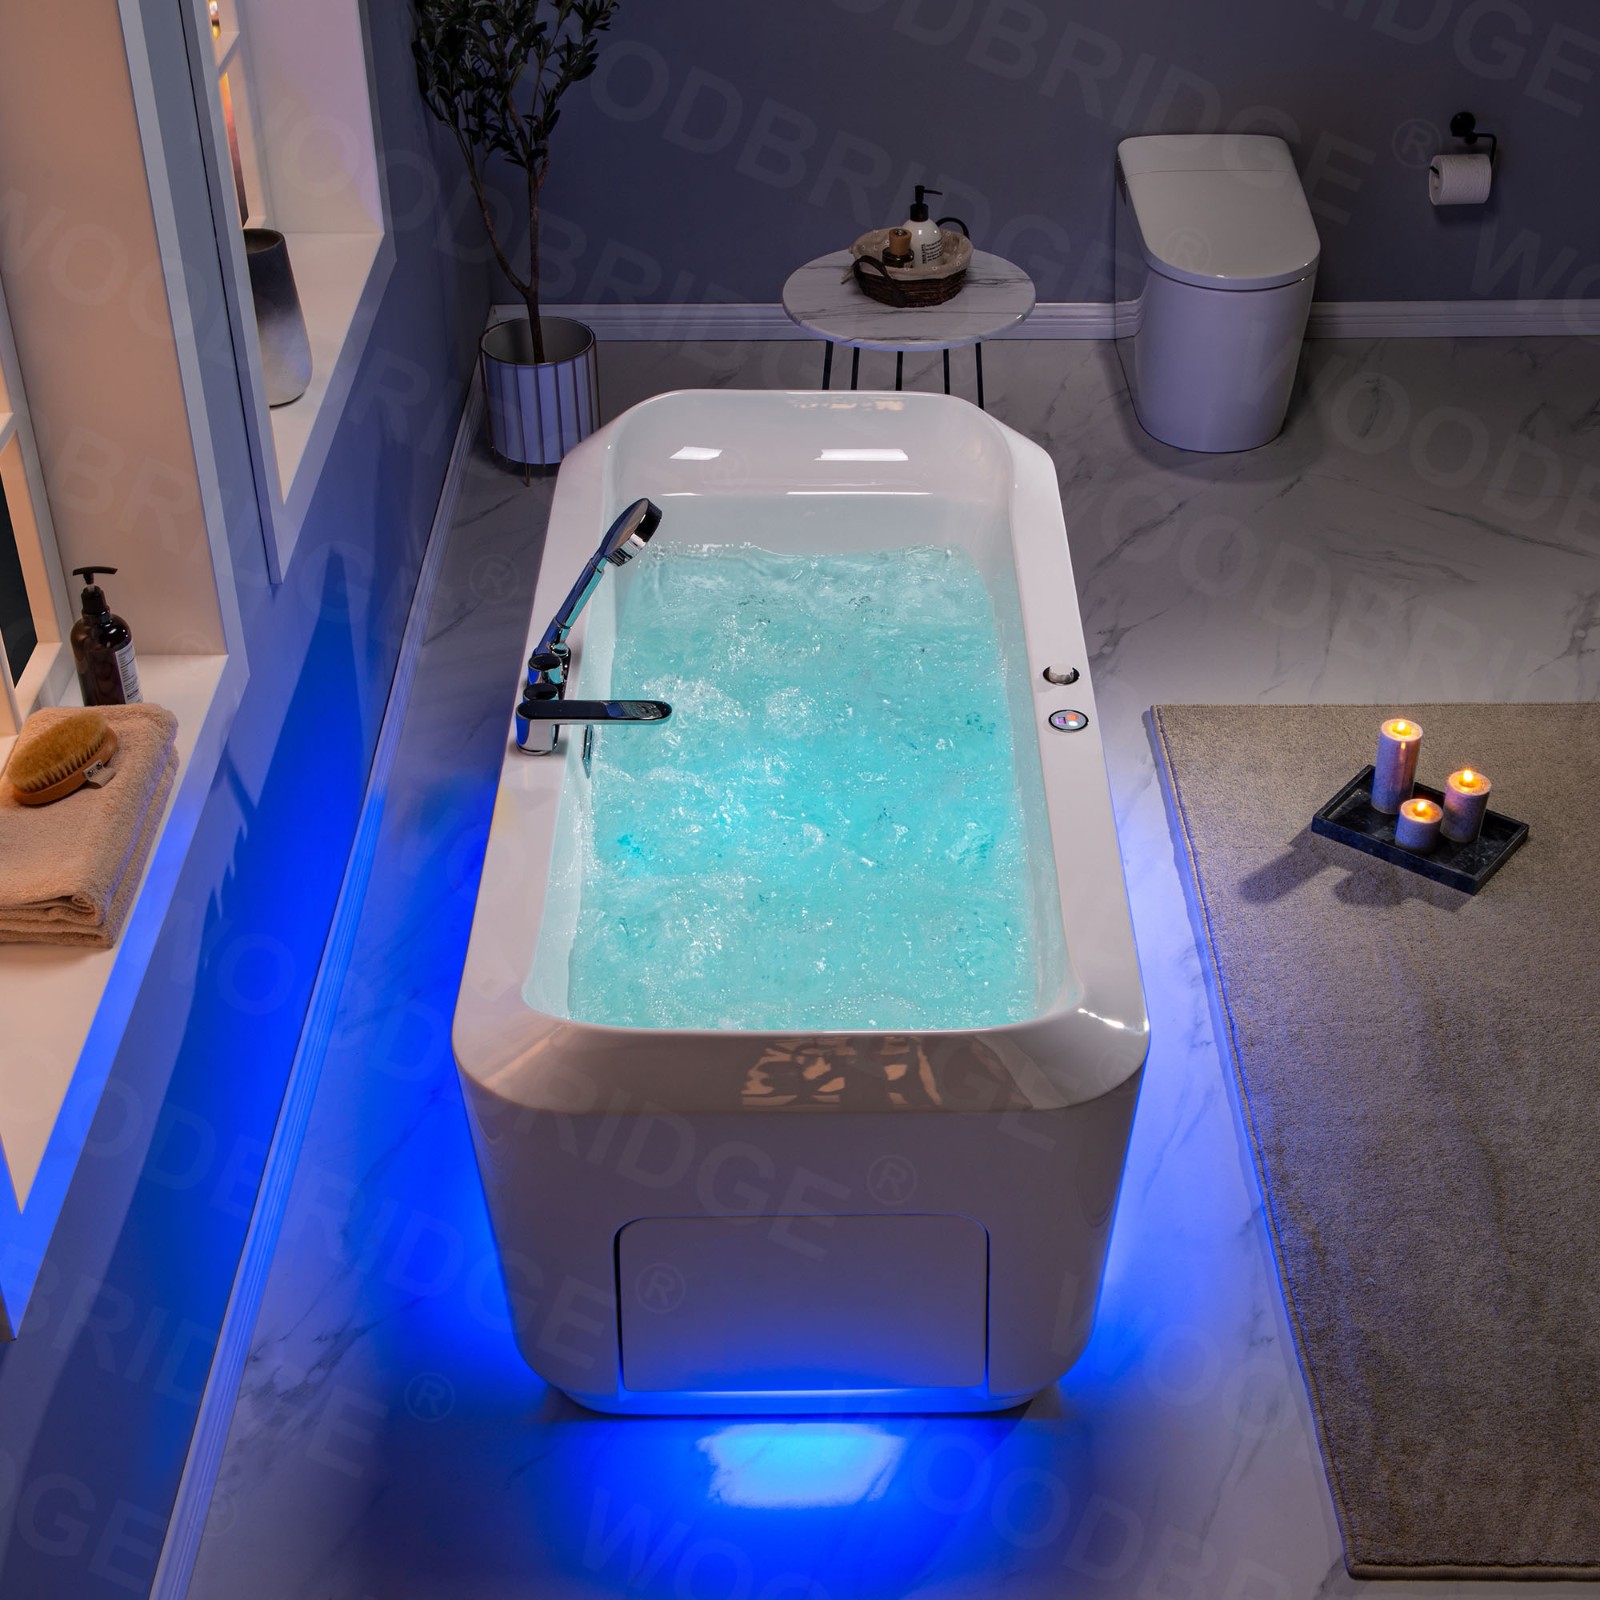  1 Person Freestanding Massage Hydrotherapy Bathtub Tub Hot Tub Spa, with Inline Heater. BTS-0092_9084